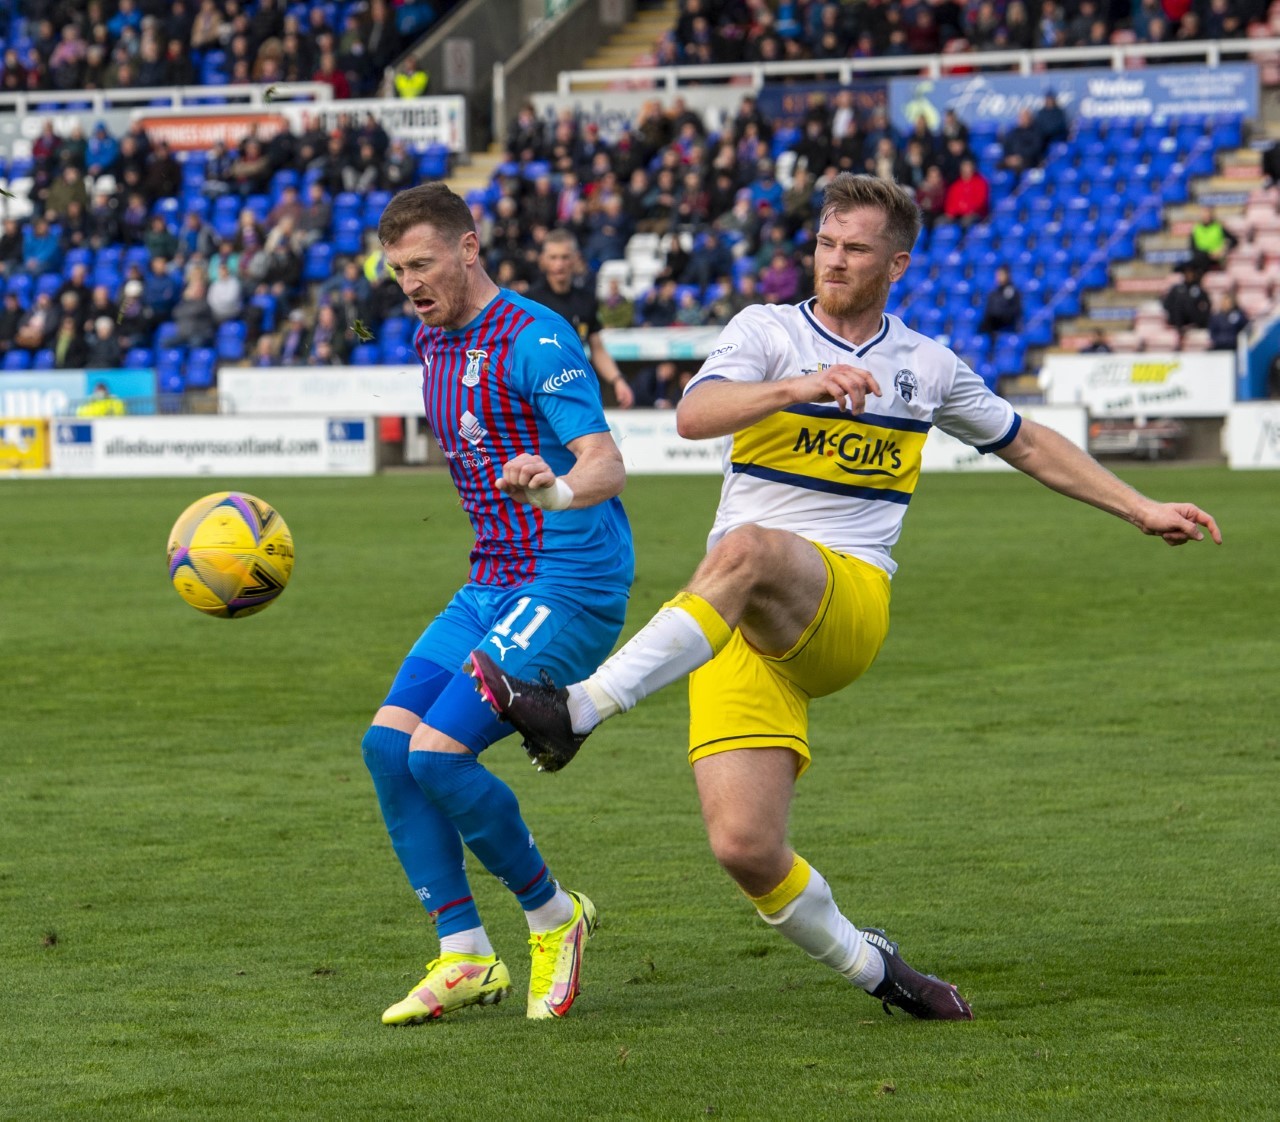 Picture gallery: Inverness Caley Thistle 2 Morton 0